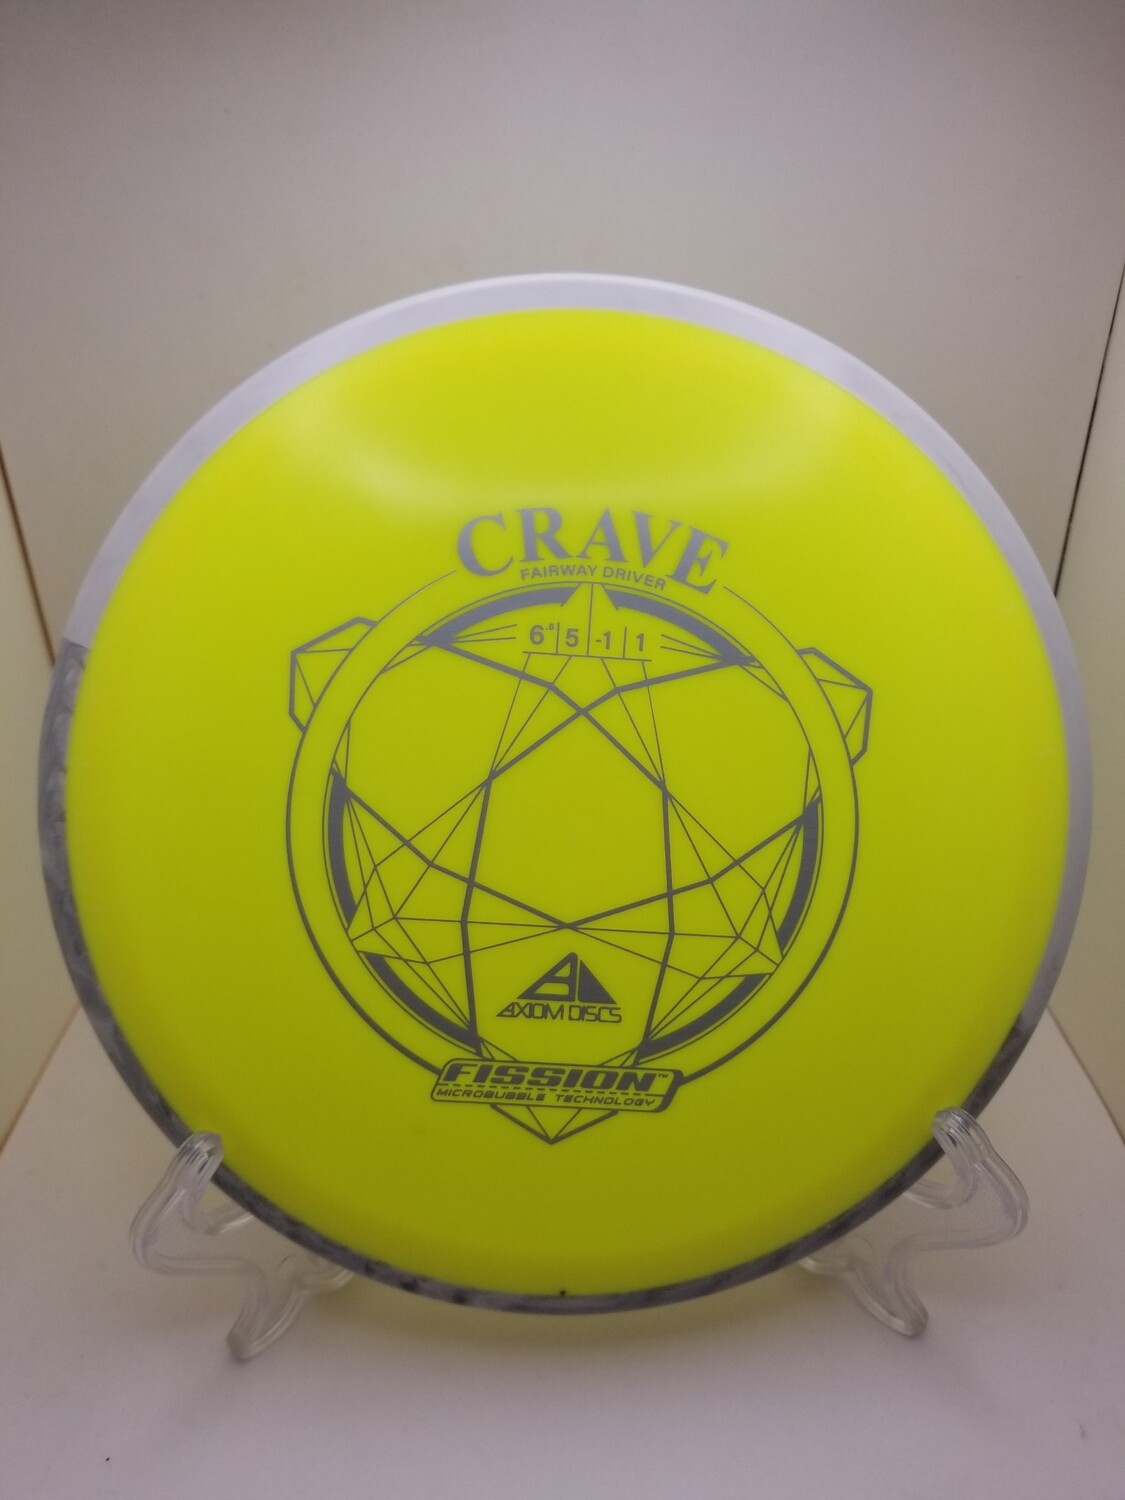 Axiom Discs Crave Yellow with Grey and White Swirl Rim Fission Stamped 157g